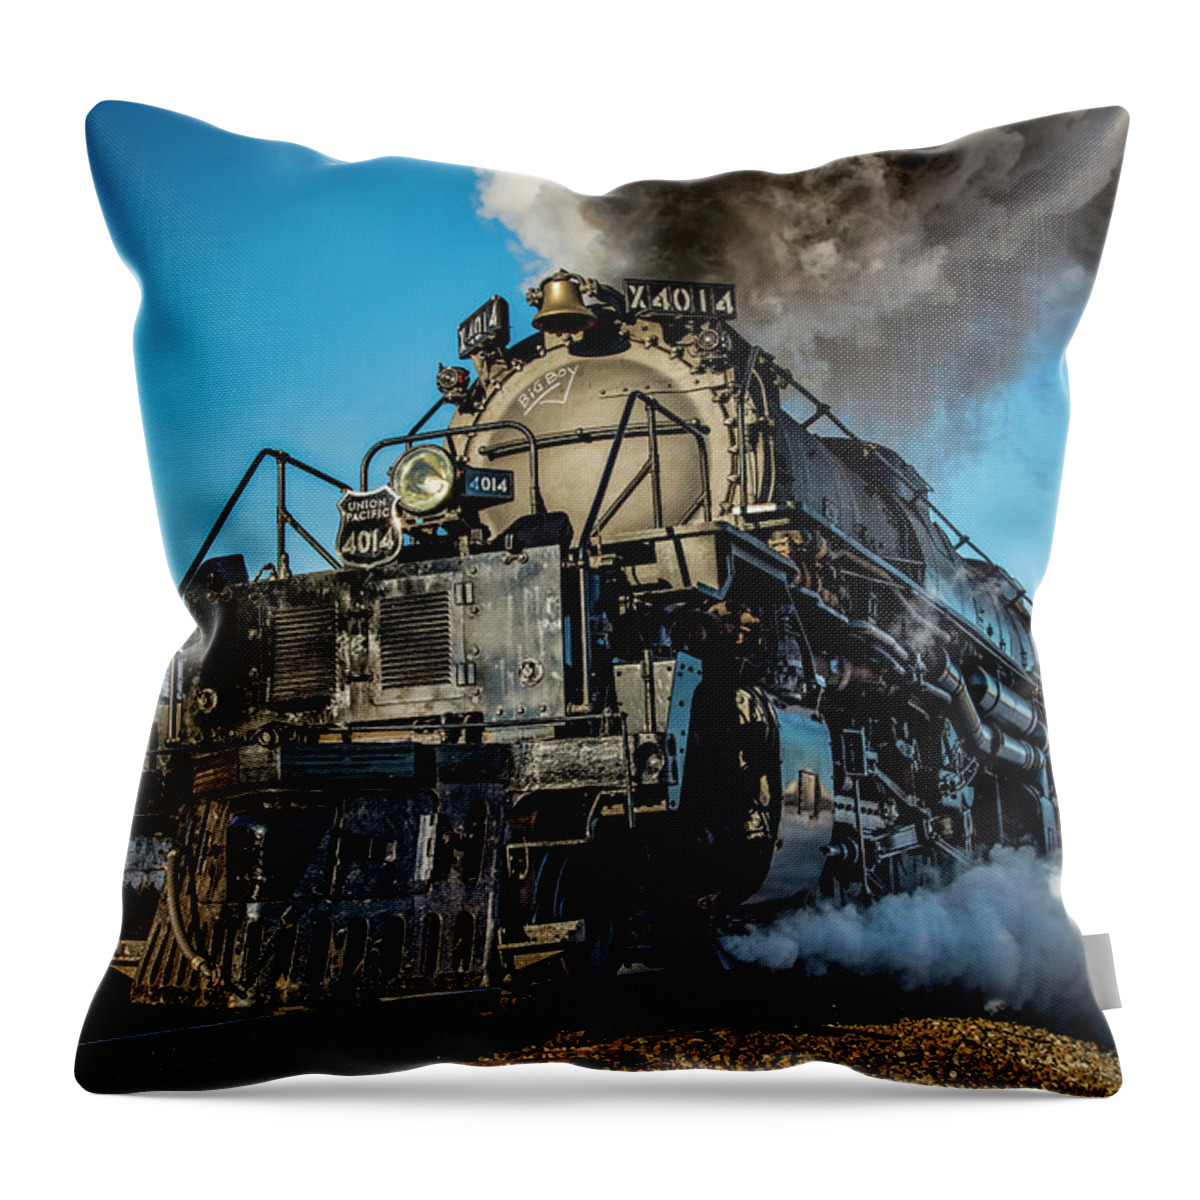 Train Throw Pillow featuring the photograph Union Pacific 4014 Big Boy in Color by David Morefield